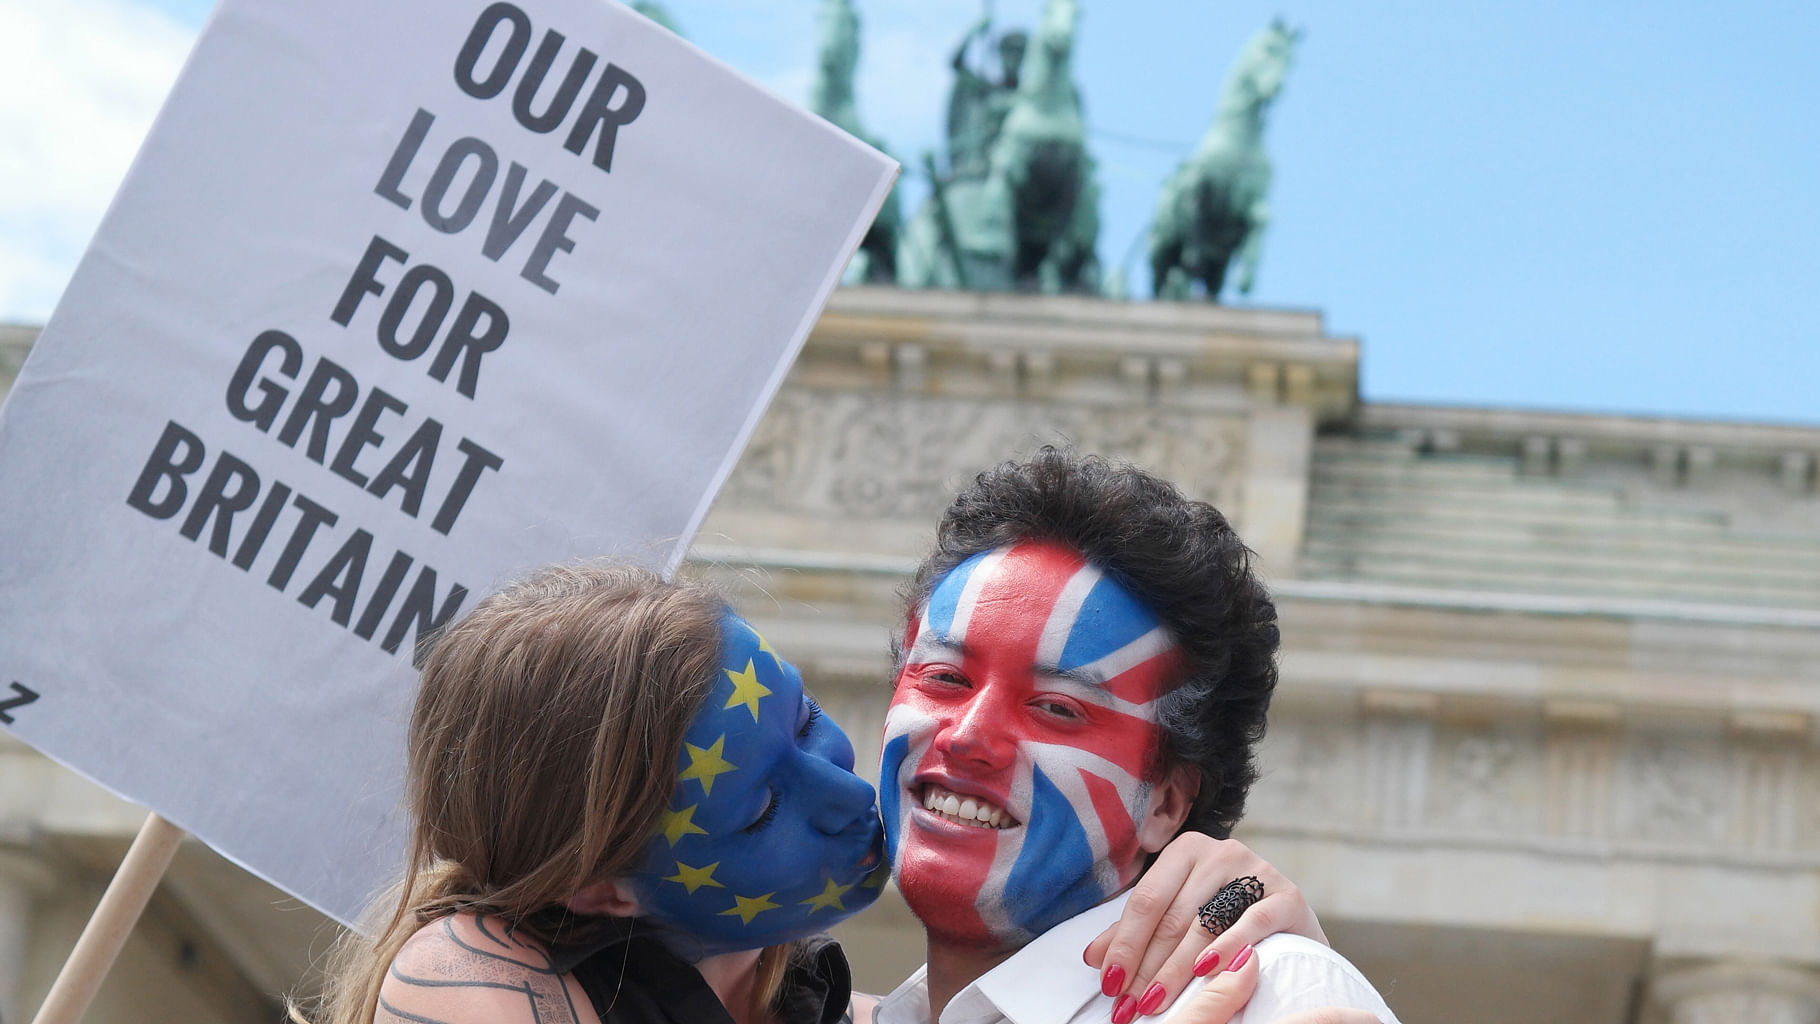 People gather in London to express love between Britain and Europe. (Photo: AP)